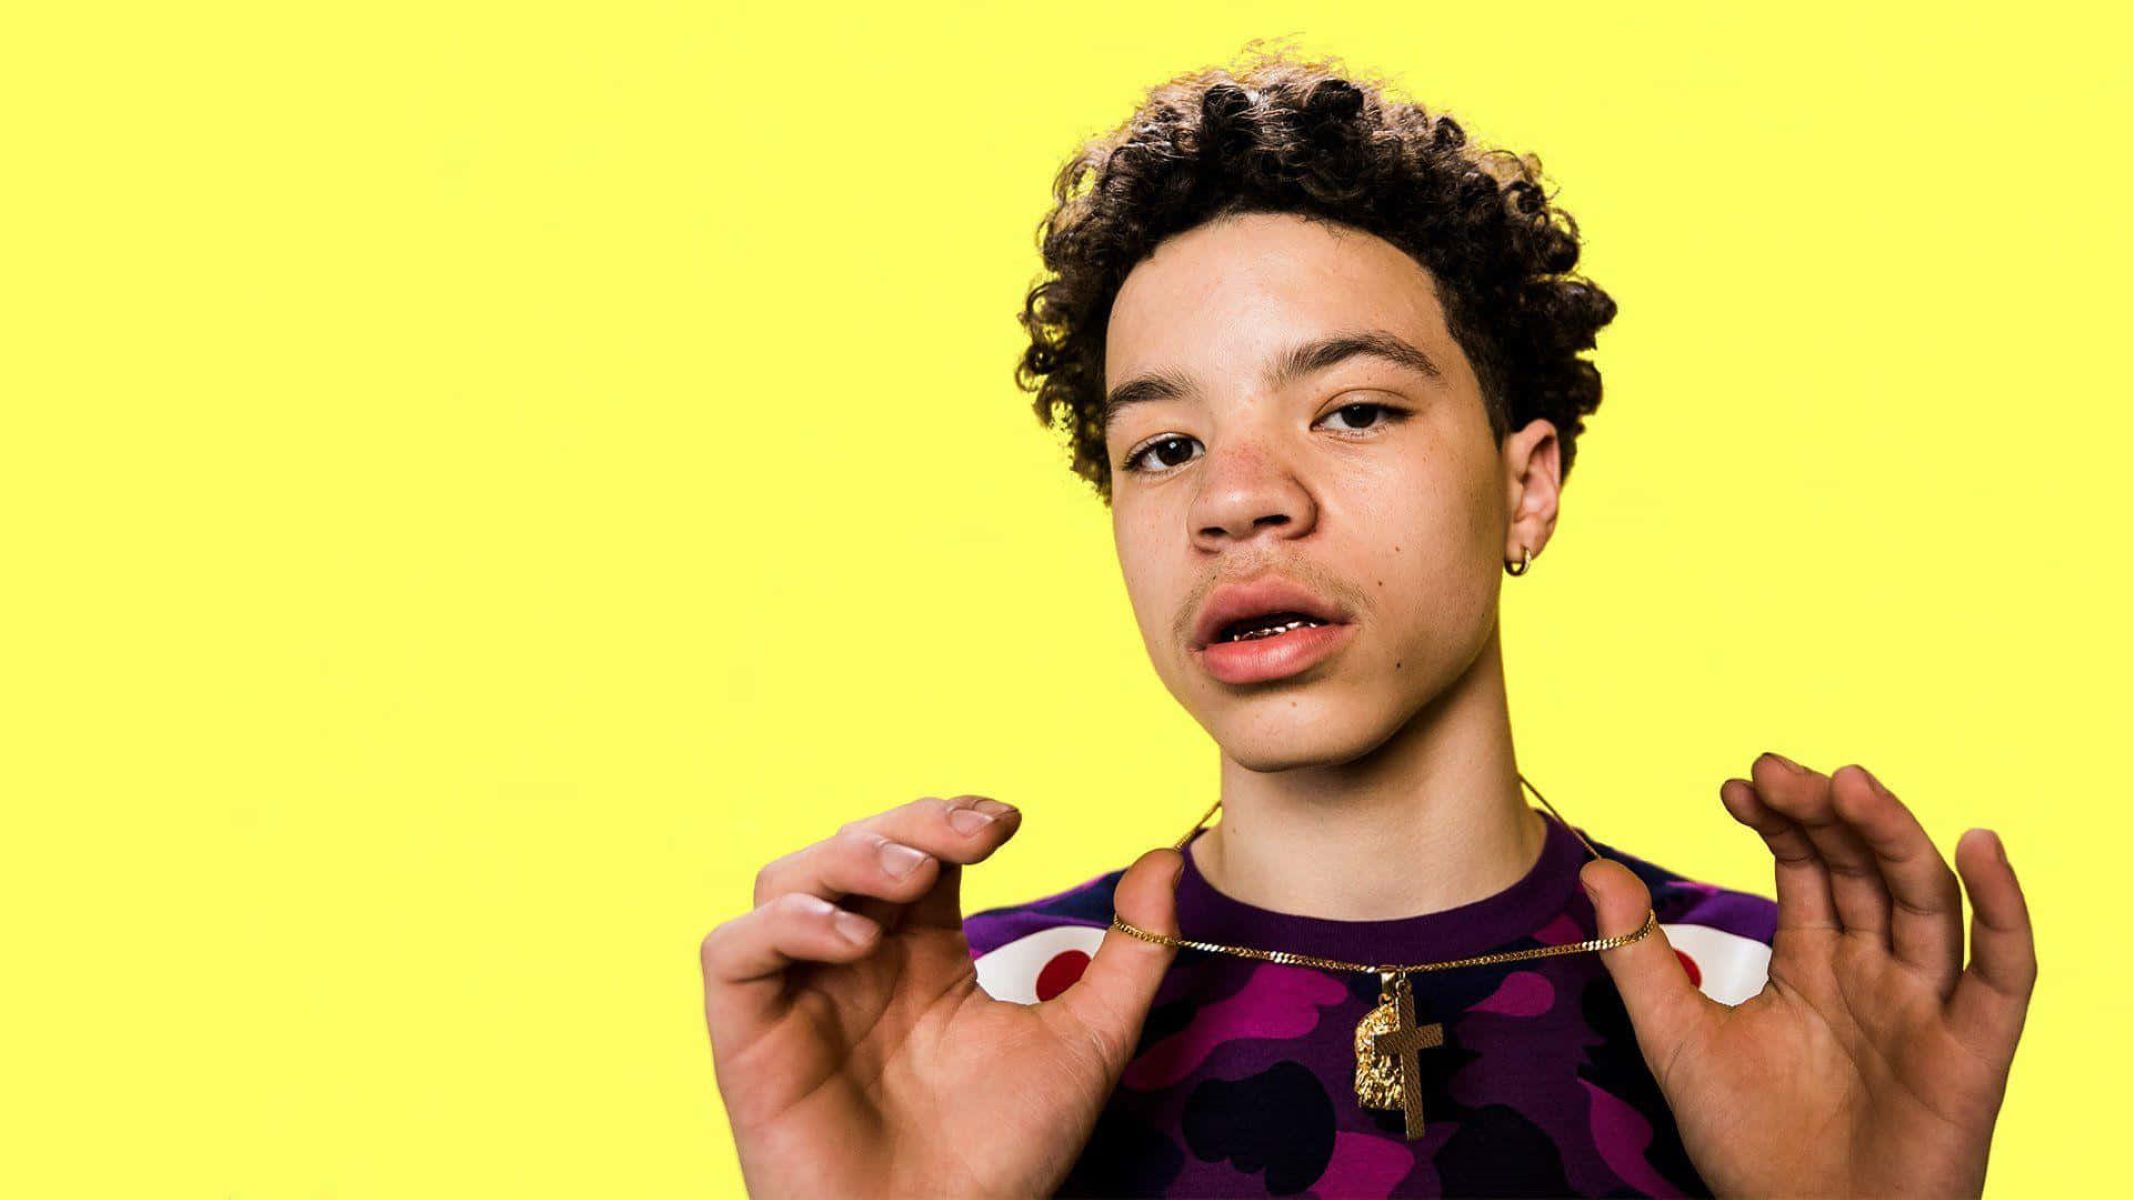 19 Extraordinary Facts About Lil Mosey